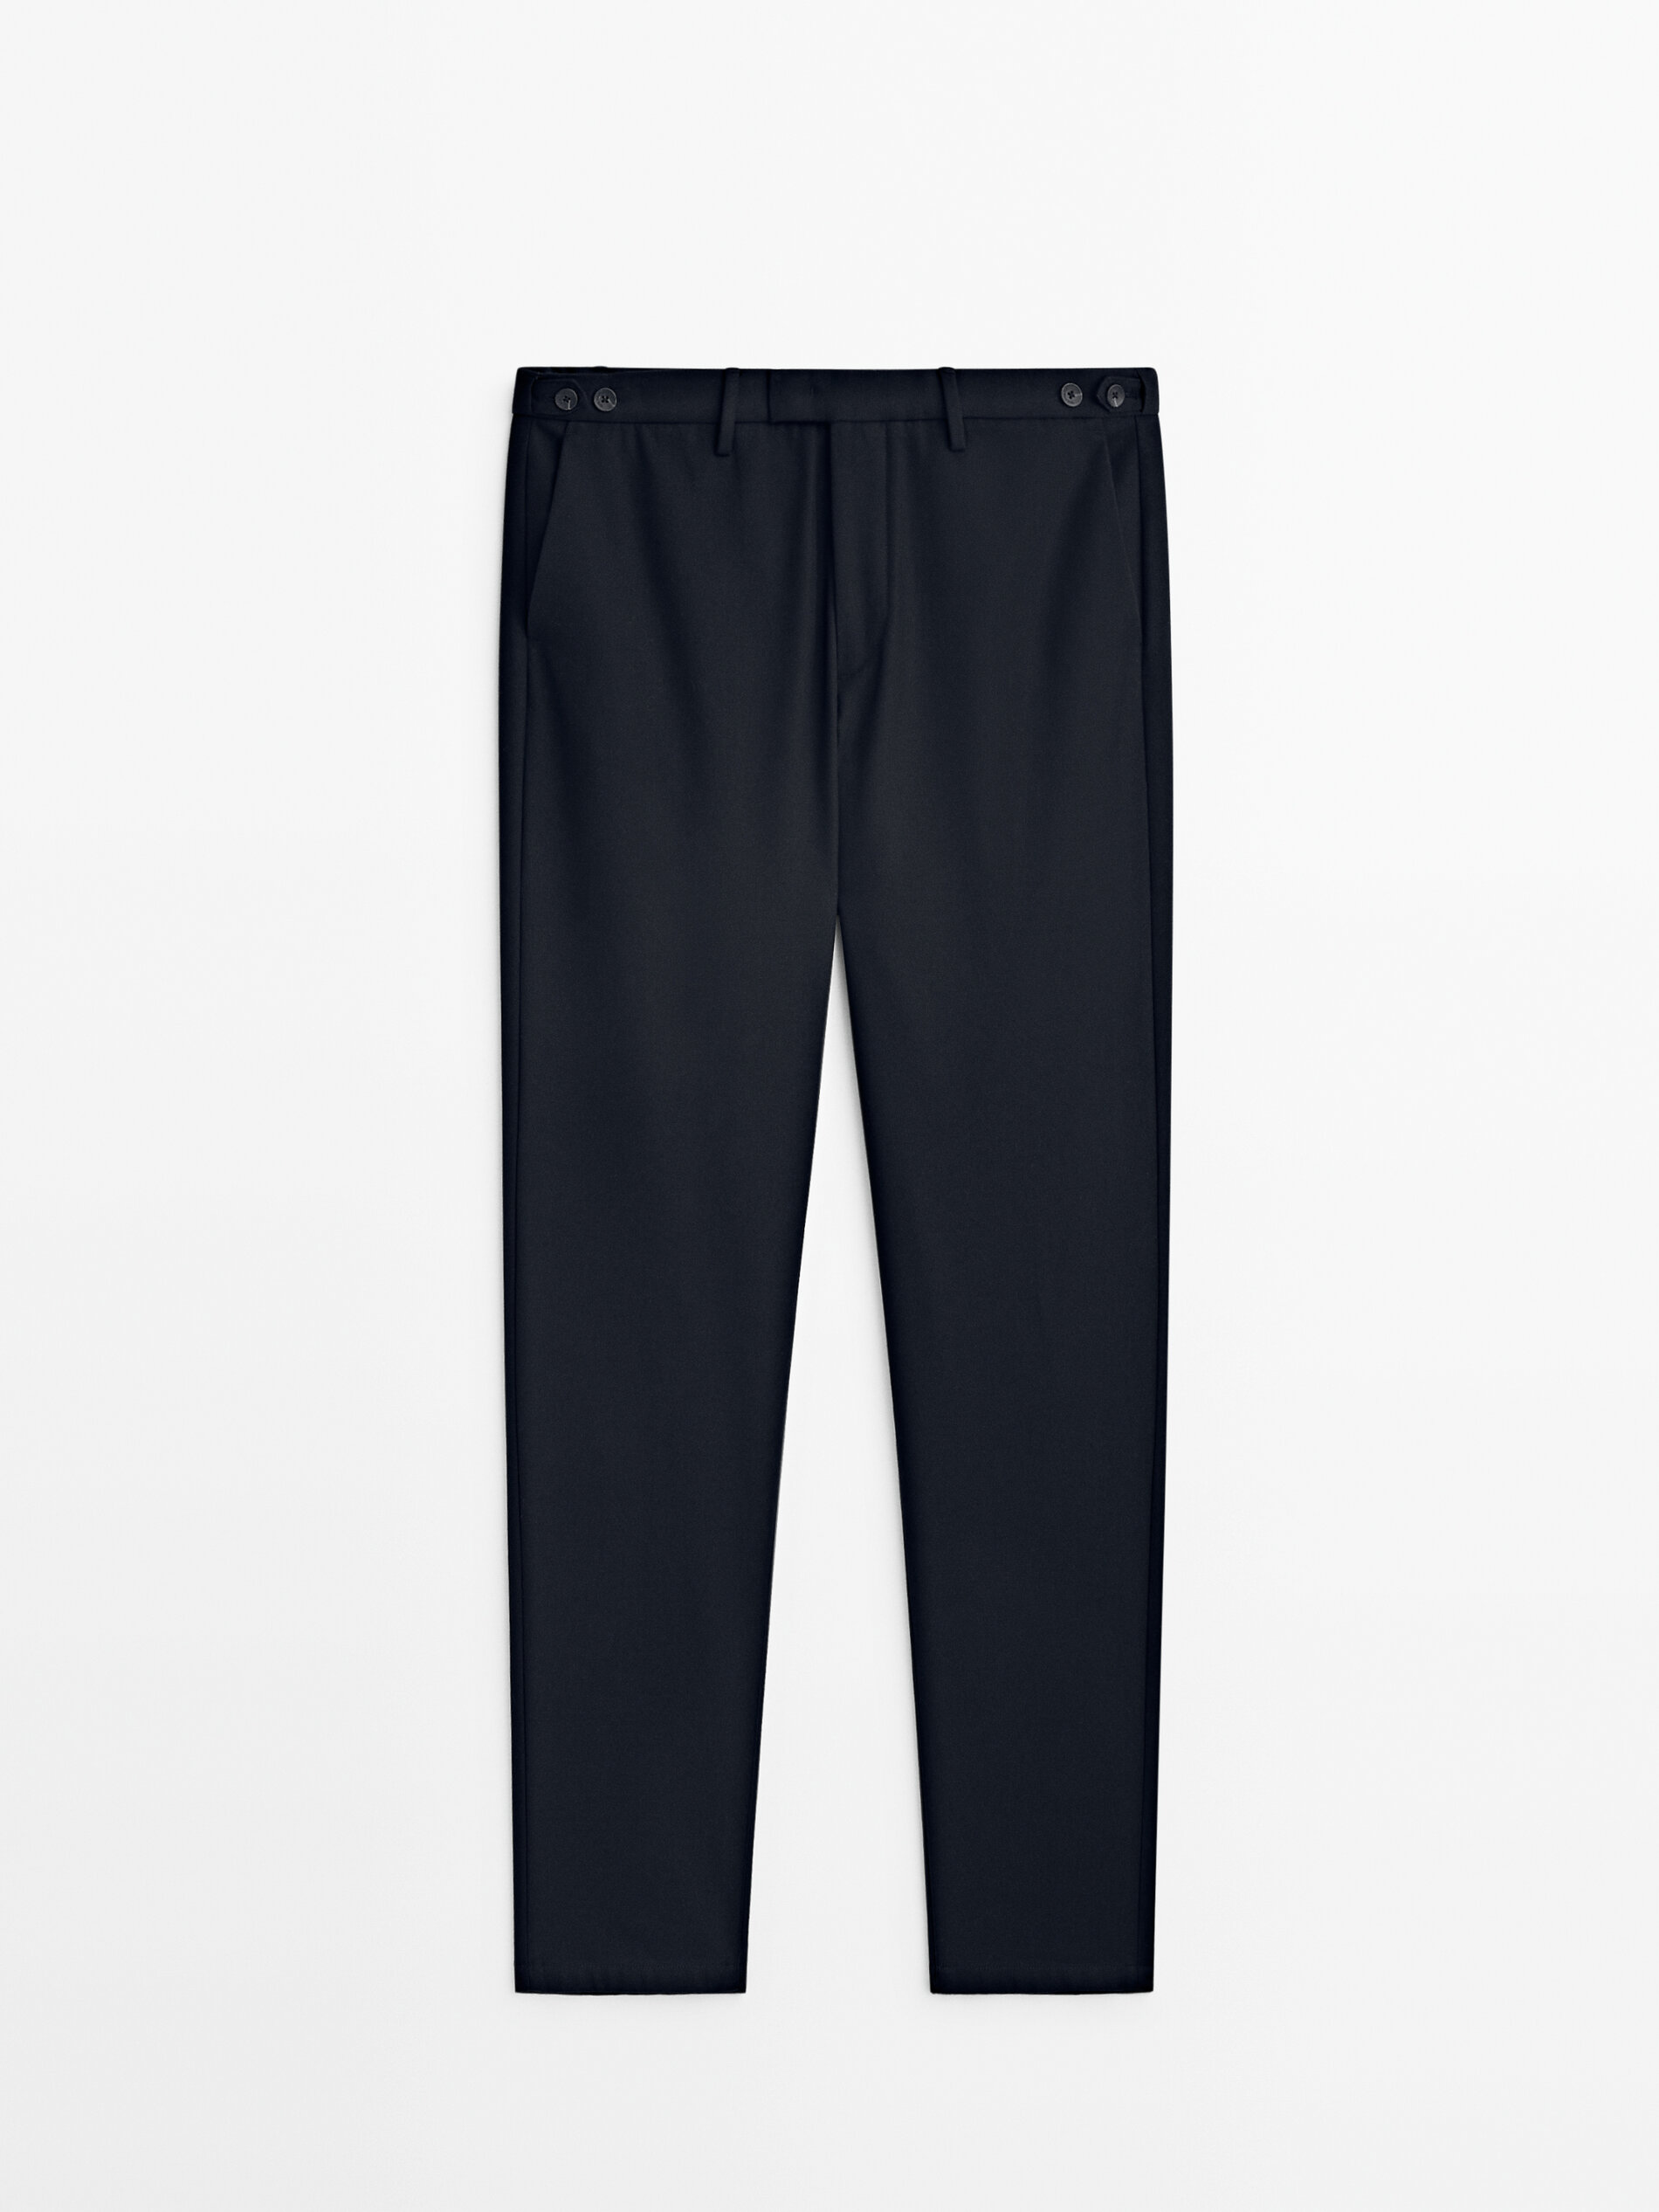 Relaxed fit chino trousers · Navy Blue, Black · Dressy | Massimo Dutti